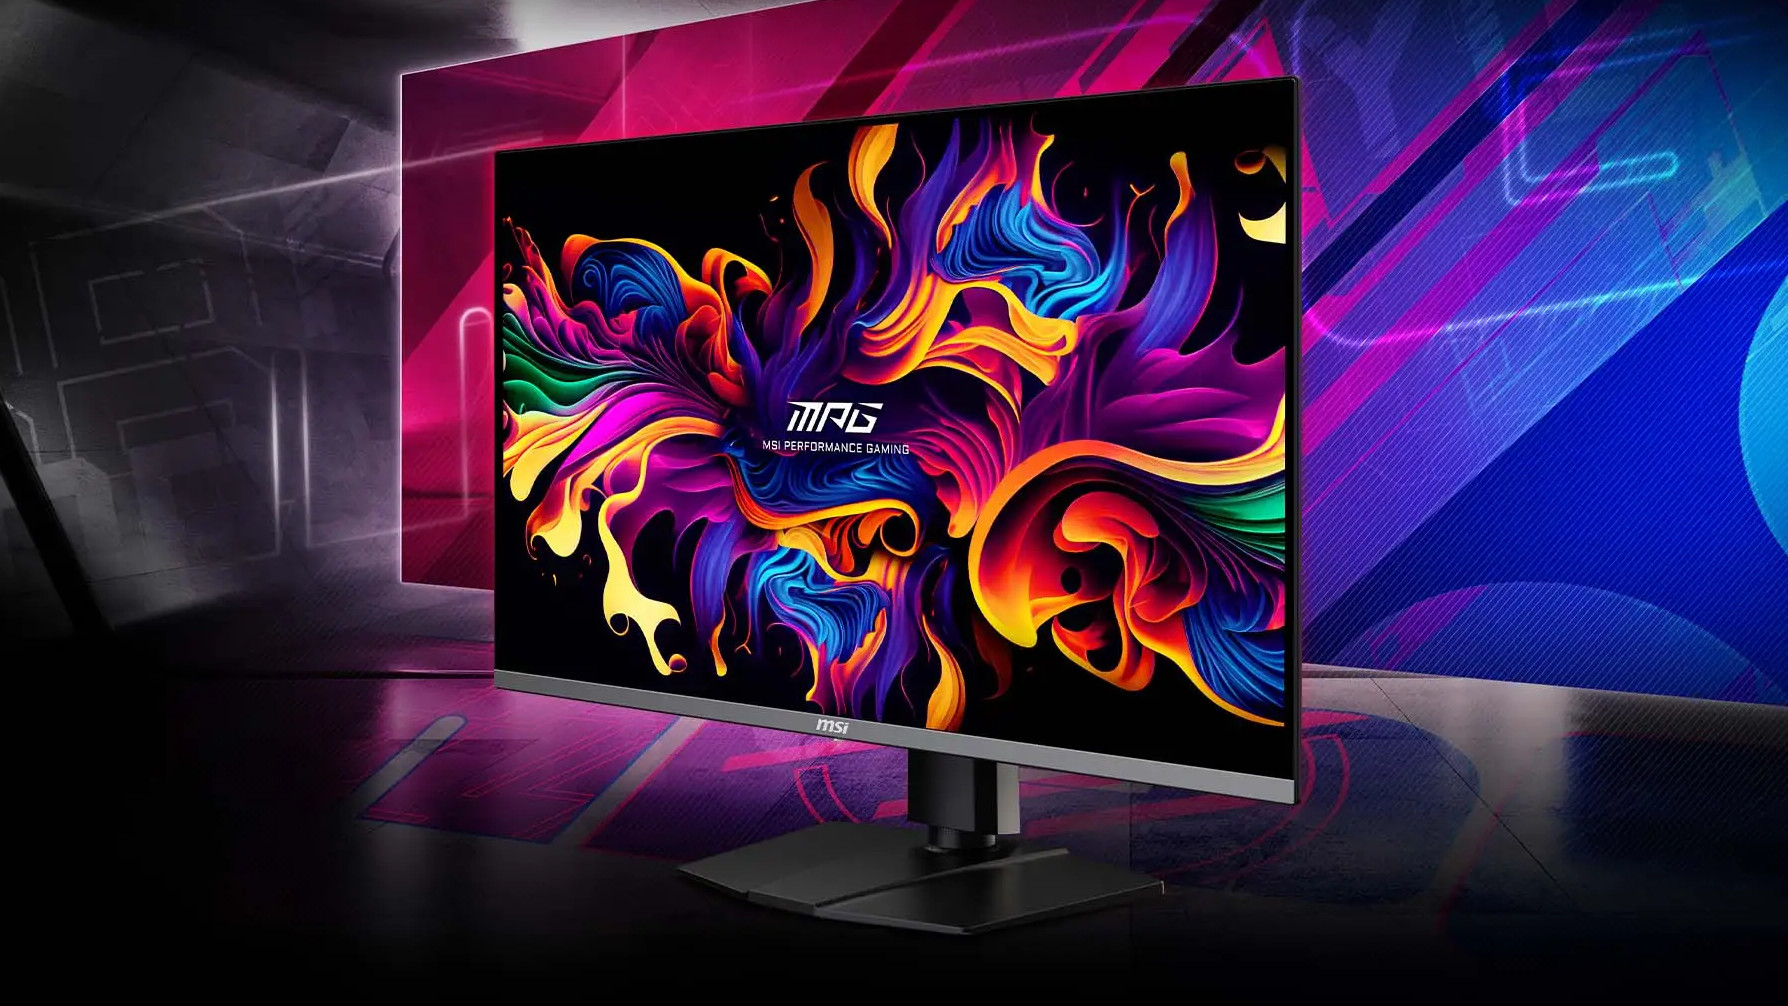 MSI's 32-inch 4K OLED monitor looks like a stunner – but its AI features  could prove seriously controversial